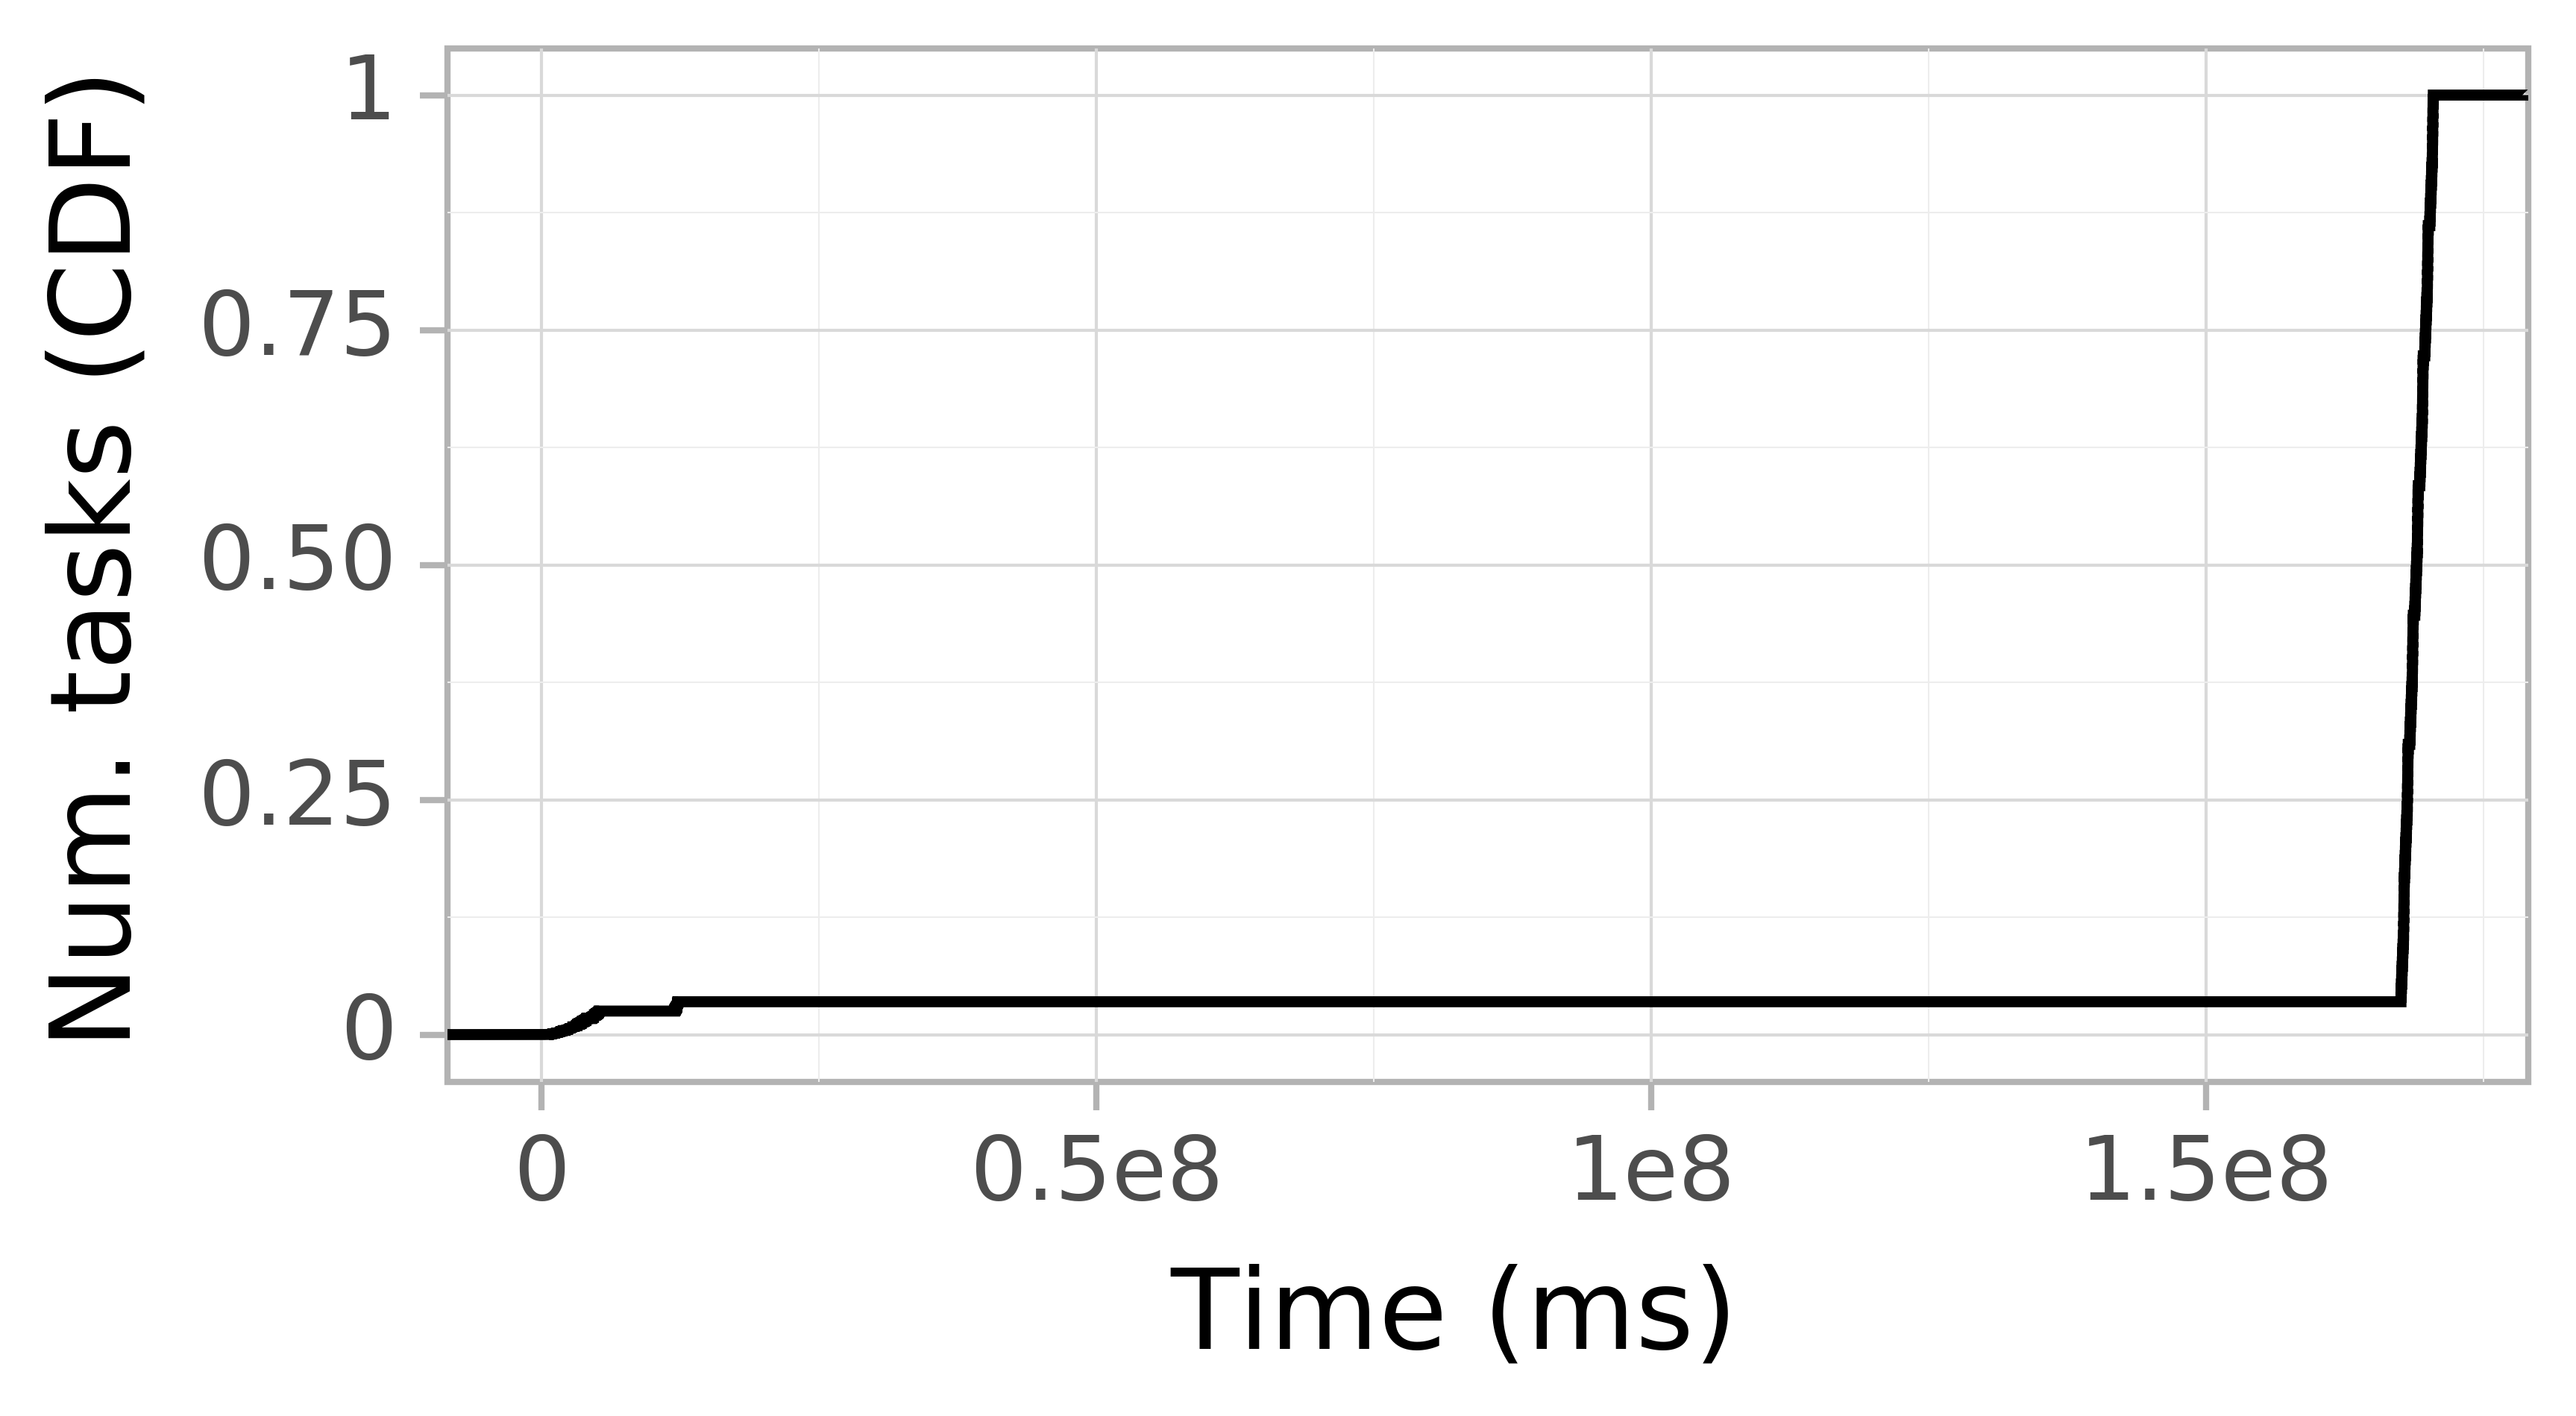 Task arrival CDF graph for the askalon-new_ee3 trace.